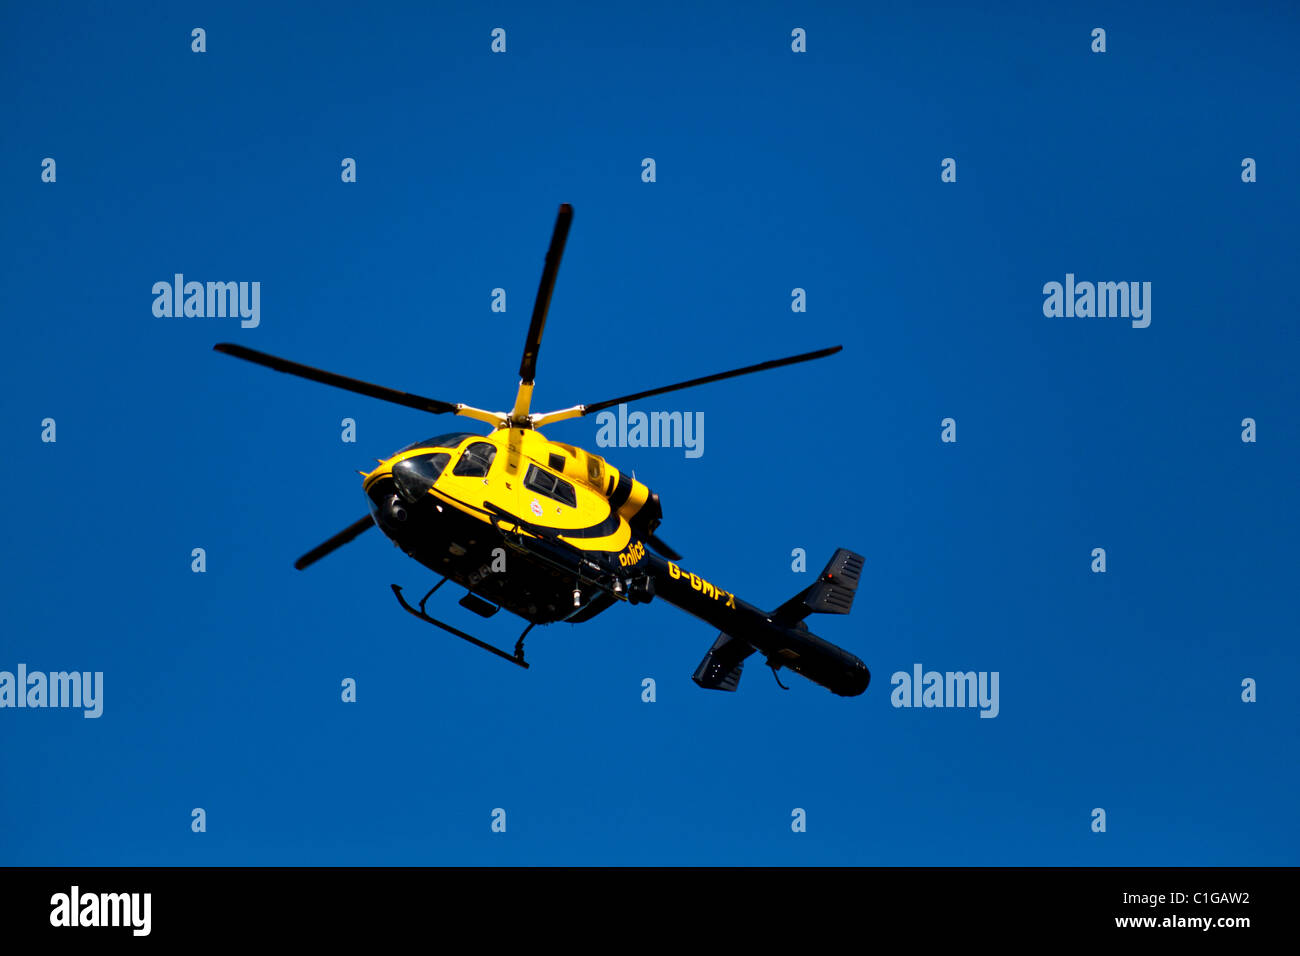 Greater Manchester Police Helicopter Stock Photo